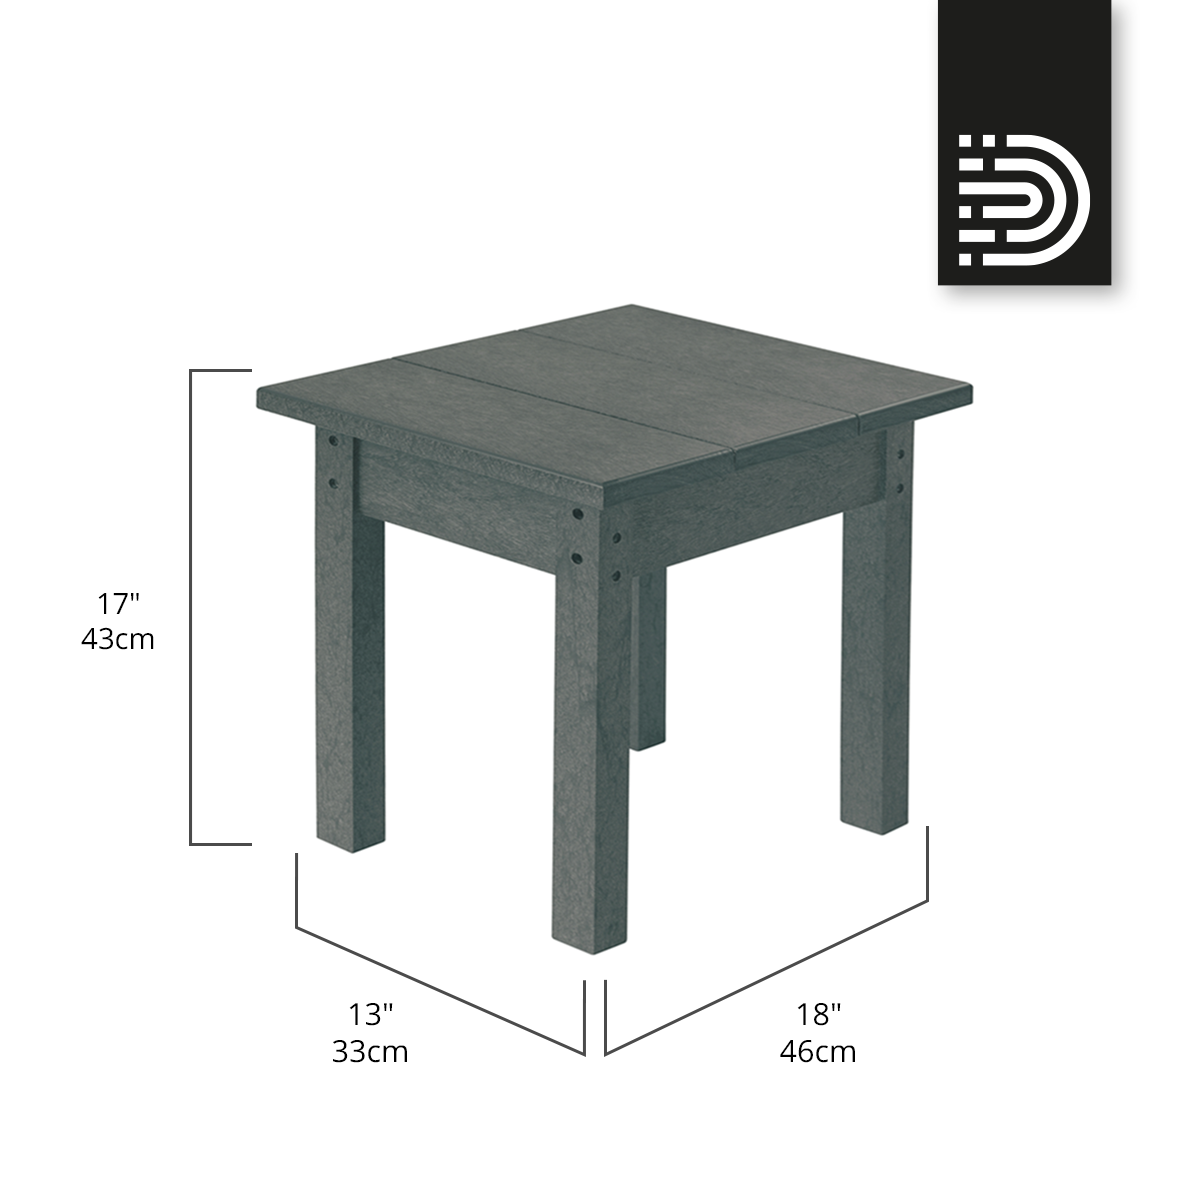 T01 small rectangular table - turquoise 09